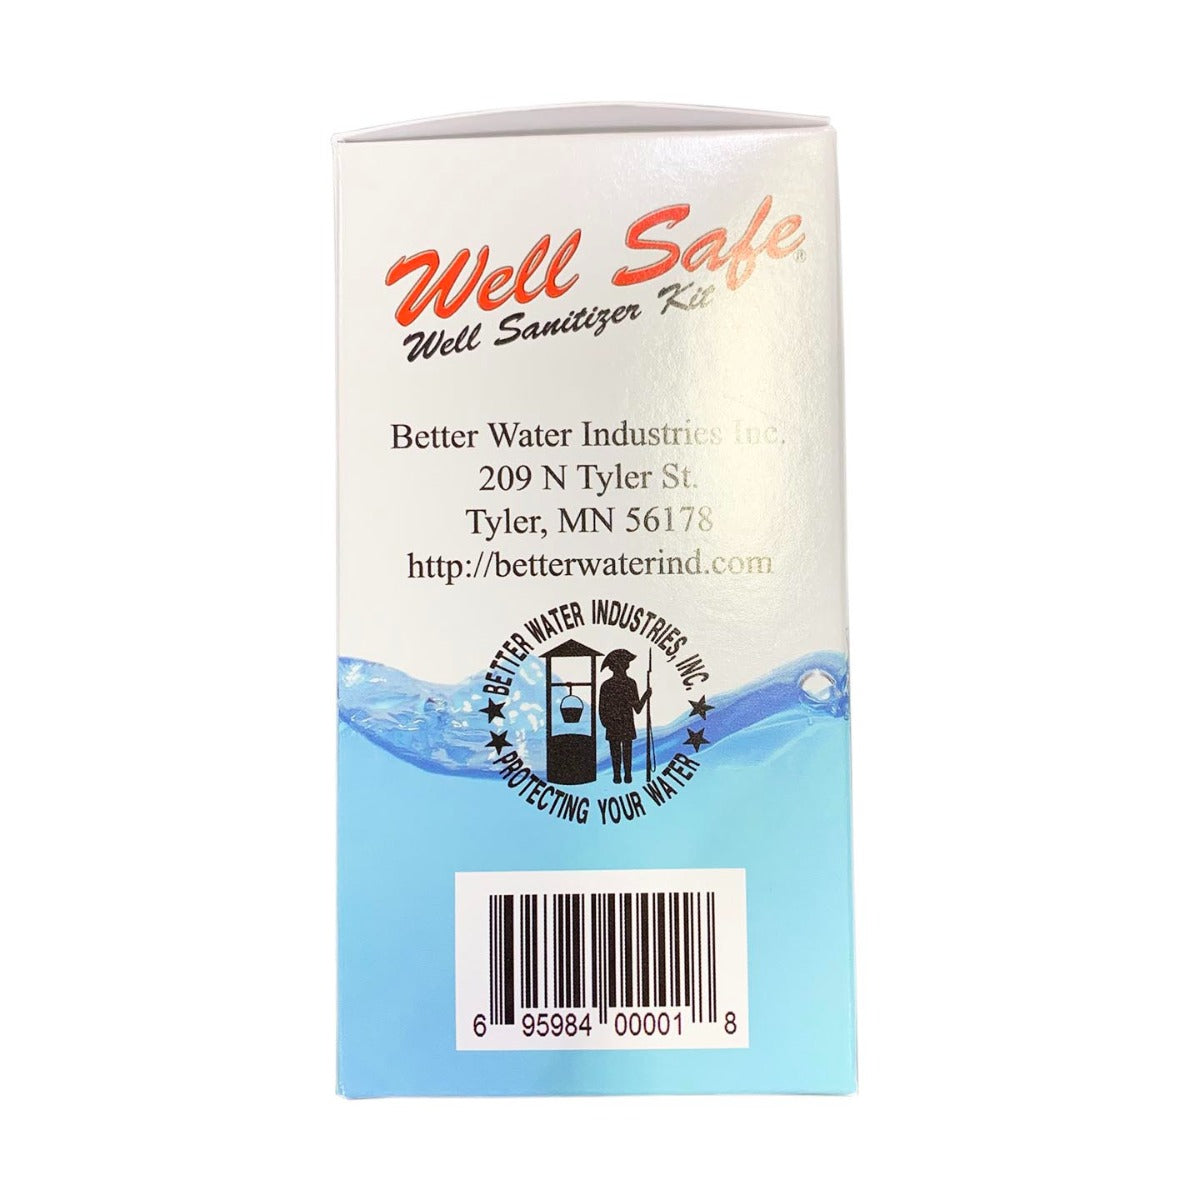 Well Safe Well Sanitizer Pack (ORM-D)